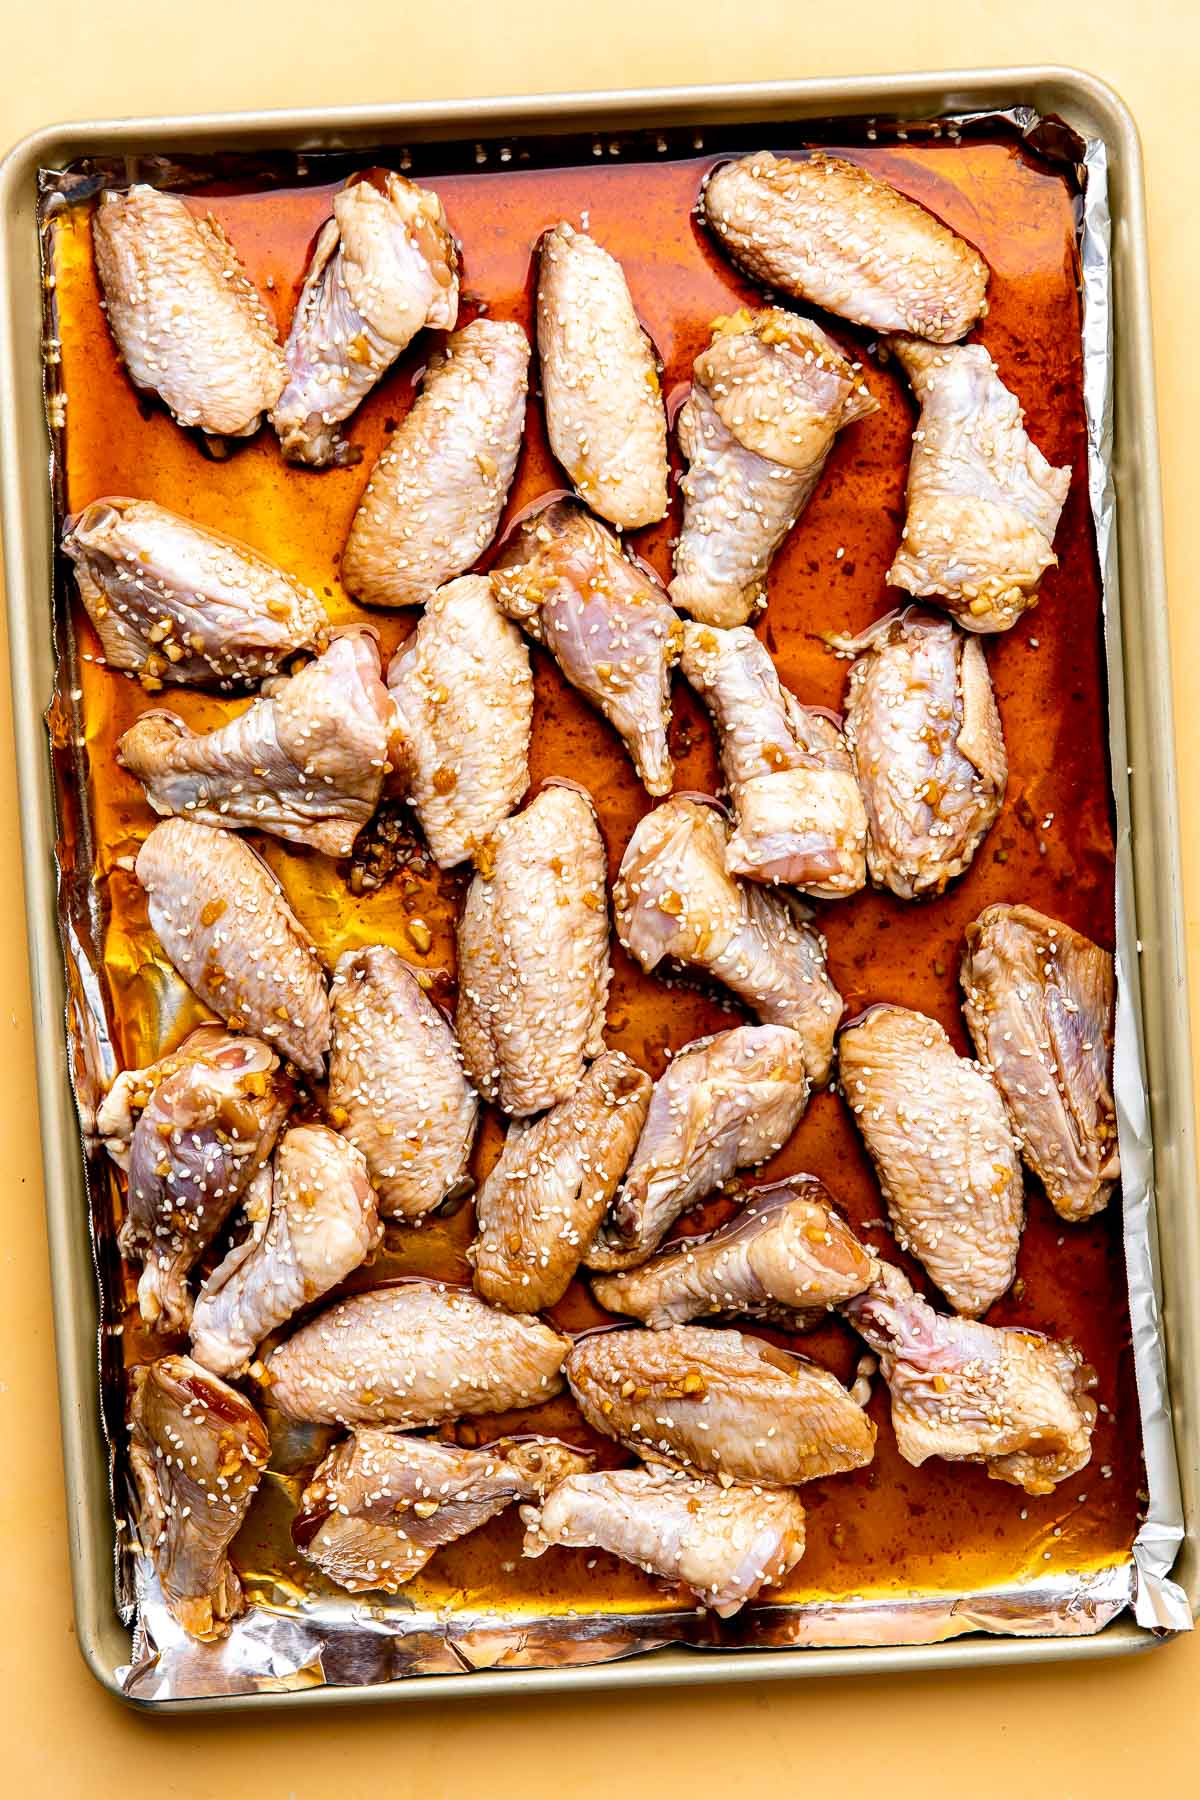 How to make baked sesame wings, step 2: Prep the chicken wings for baking. Chicken wings sections that have been marinated in honey sesame marinade are spread out across an aluminum foil lined baking sheet in a single layer. The baking sheet sits atop a yellow textured surface.